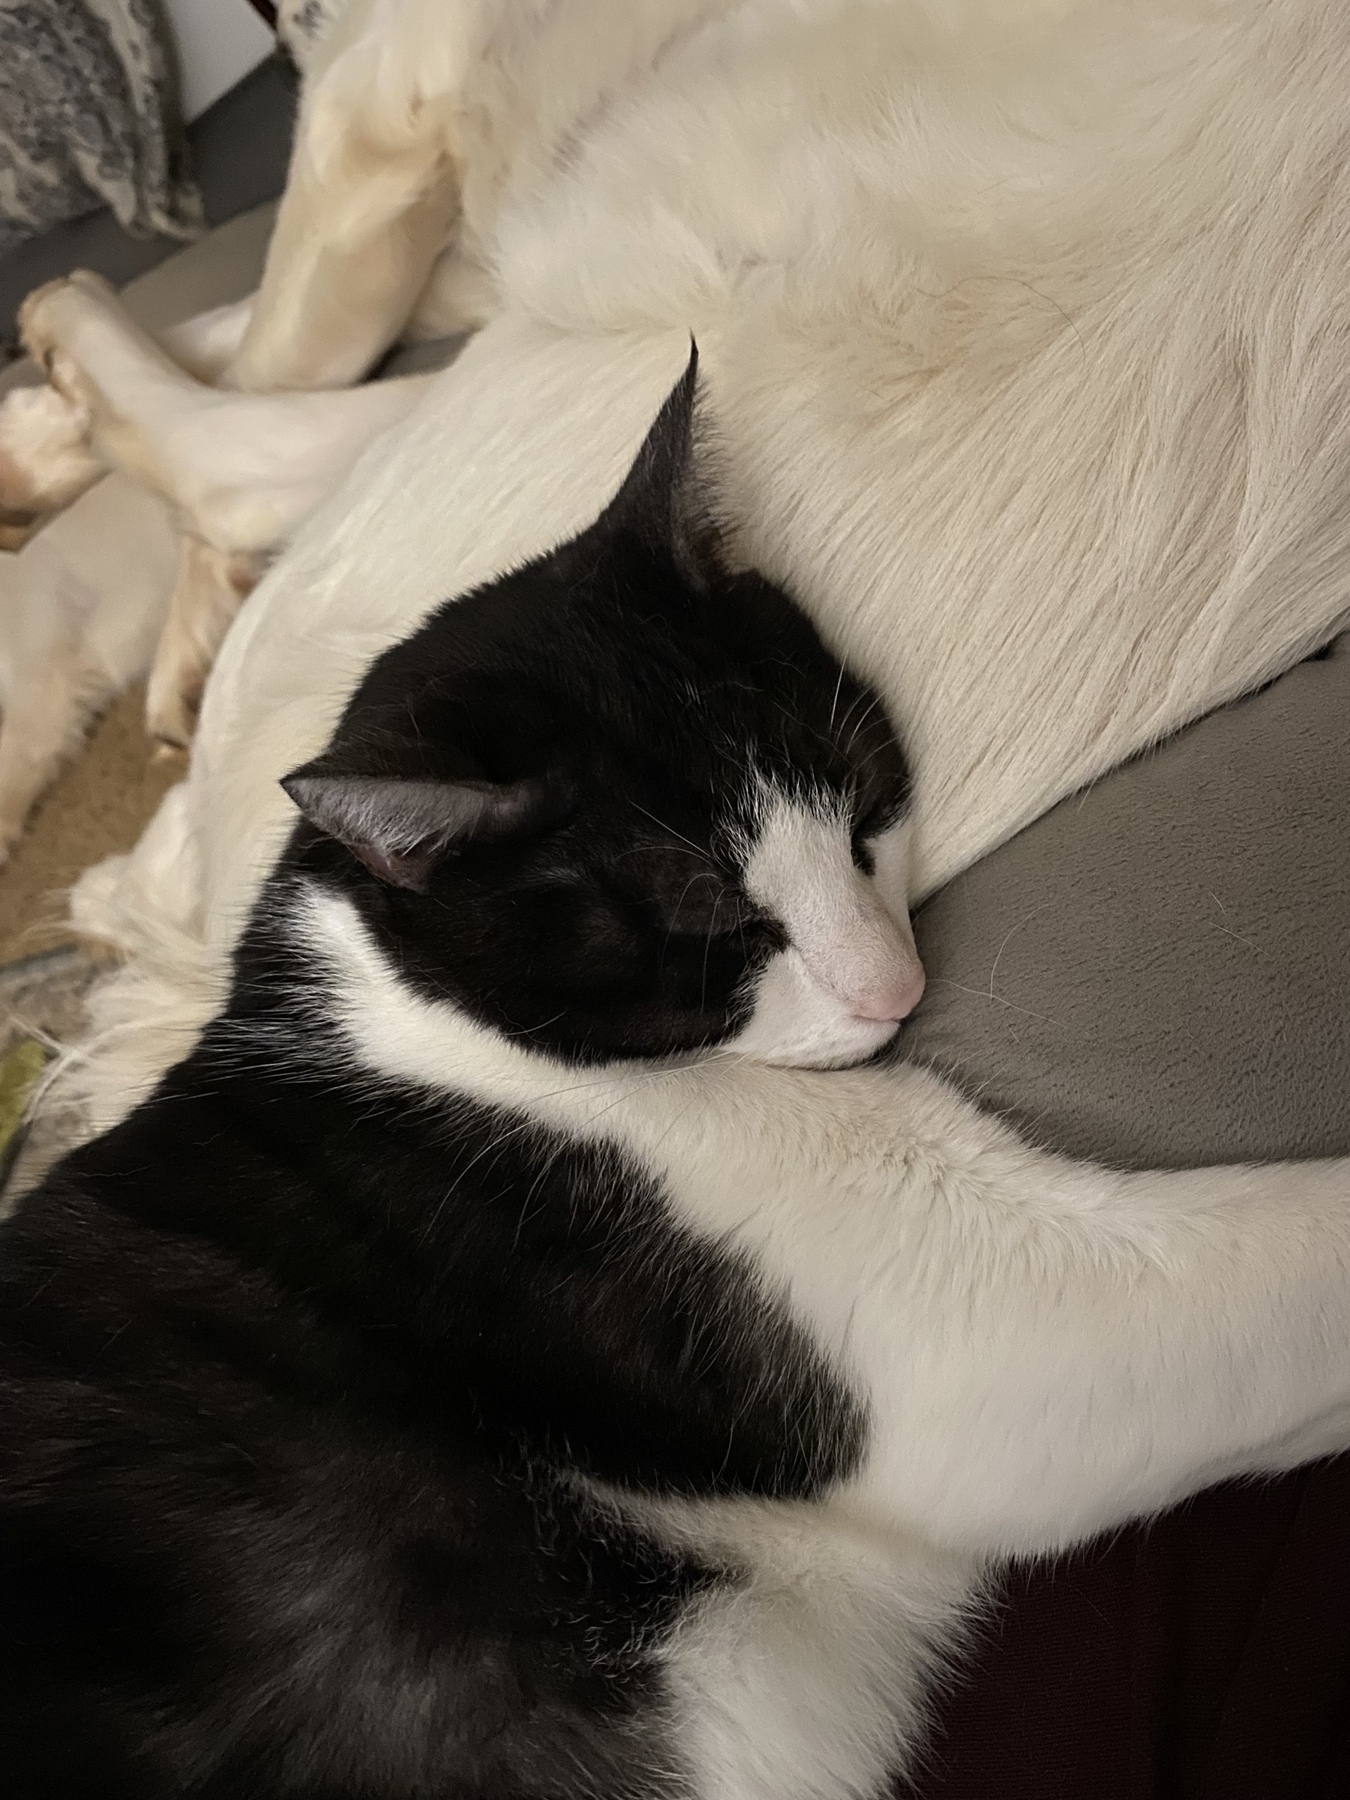 Our kitty, Flynn, asleep with his head on Ms. Gracie, our monster puppy.